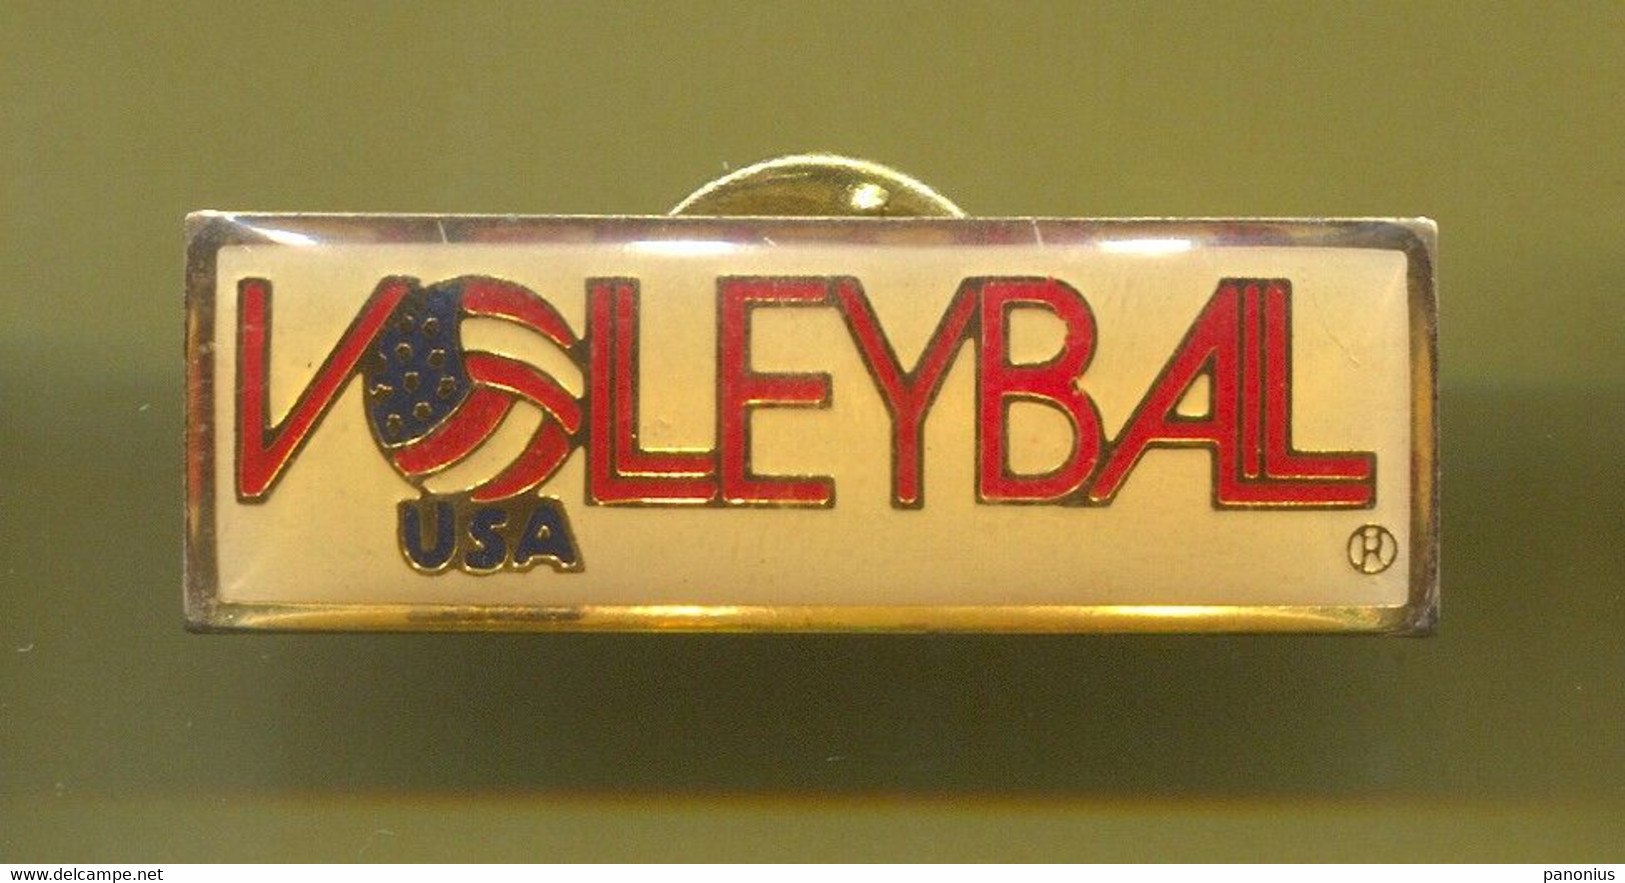 Volleyball Pallavolo - United States Federation Association, Pin Badge Abzeichen - Volleyball